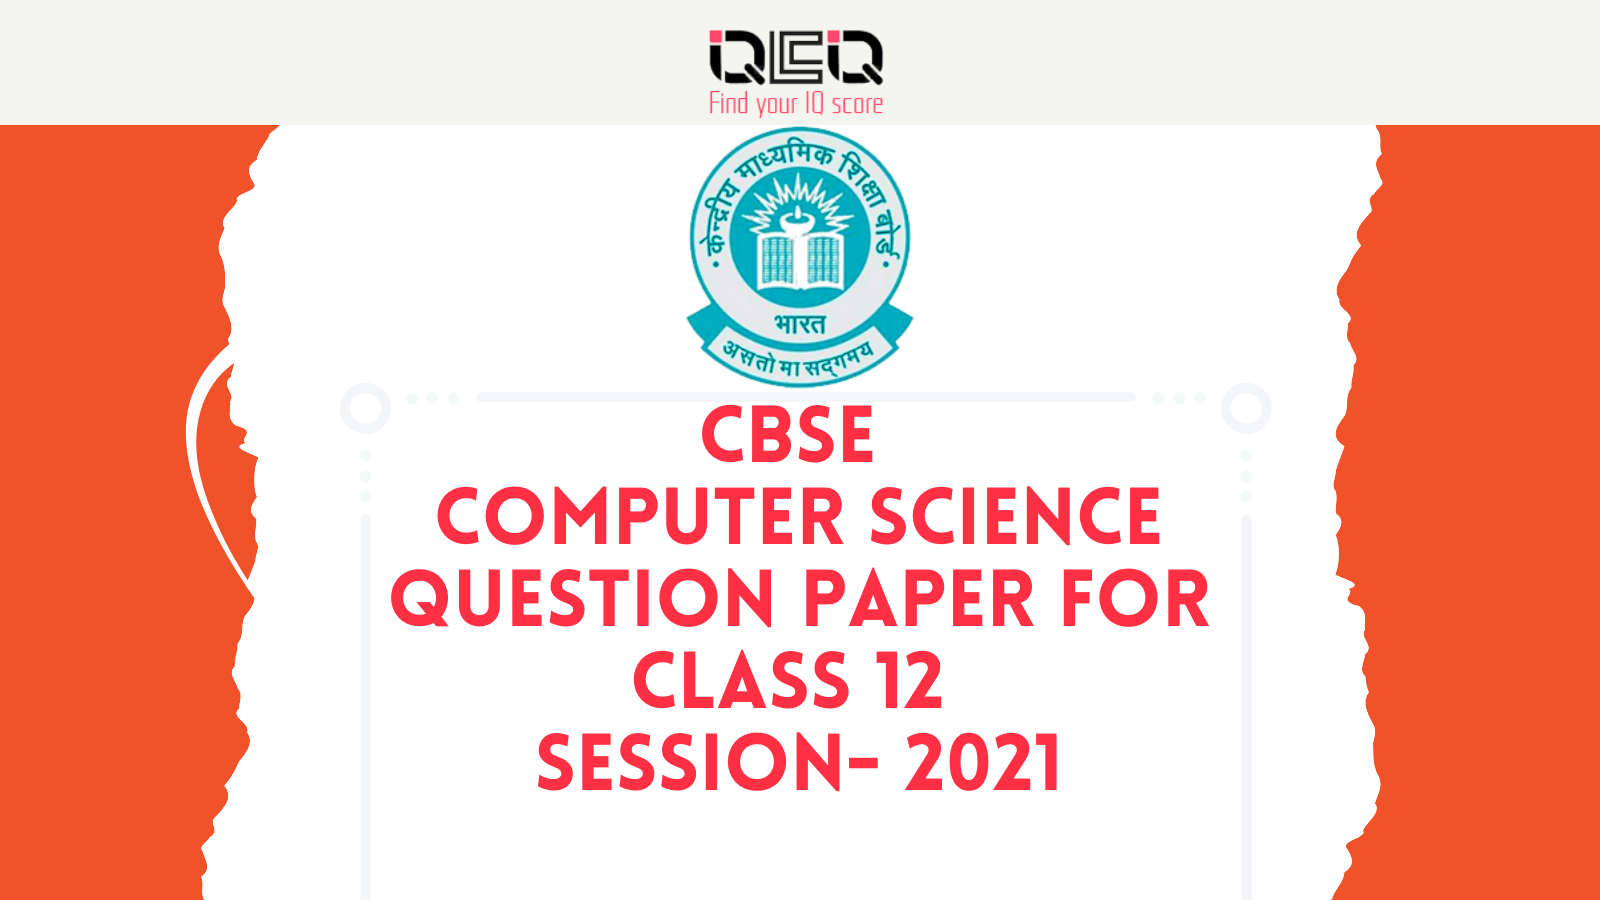 CBSE Computer Science Question Paper for Class 12 of 2021